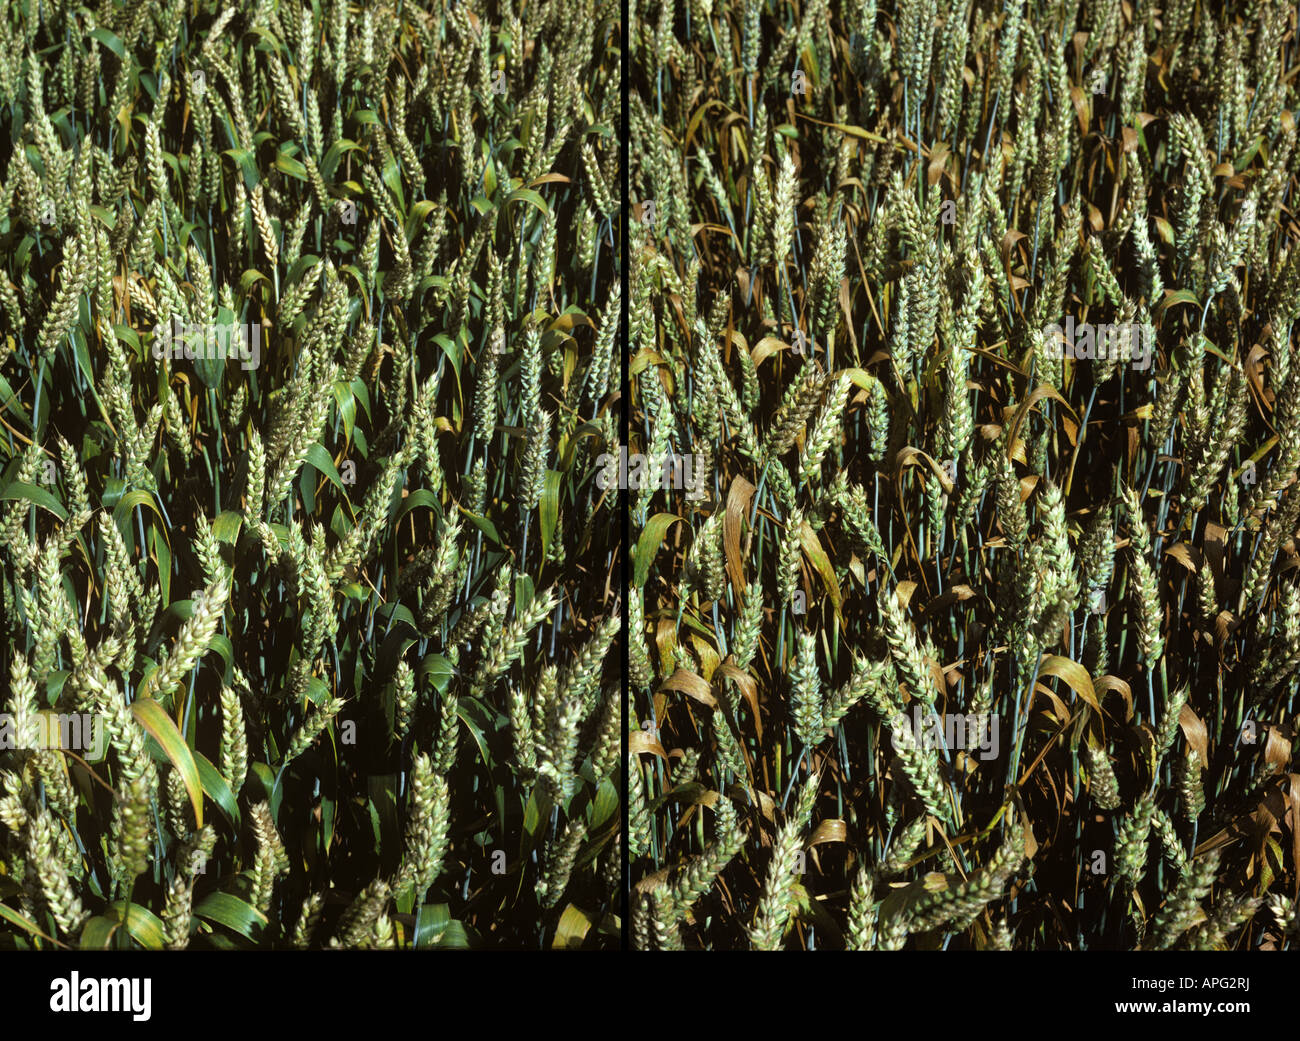 Wheat leaf or brown rust Puccinia triticina diseased wheat crop in green ear compared to healthy crop Stock Photo